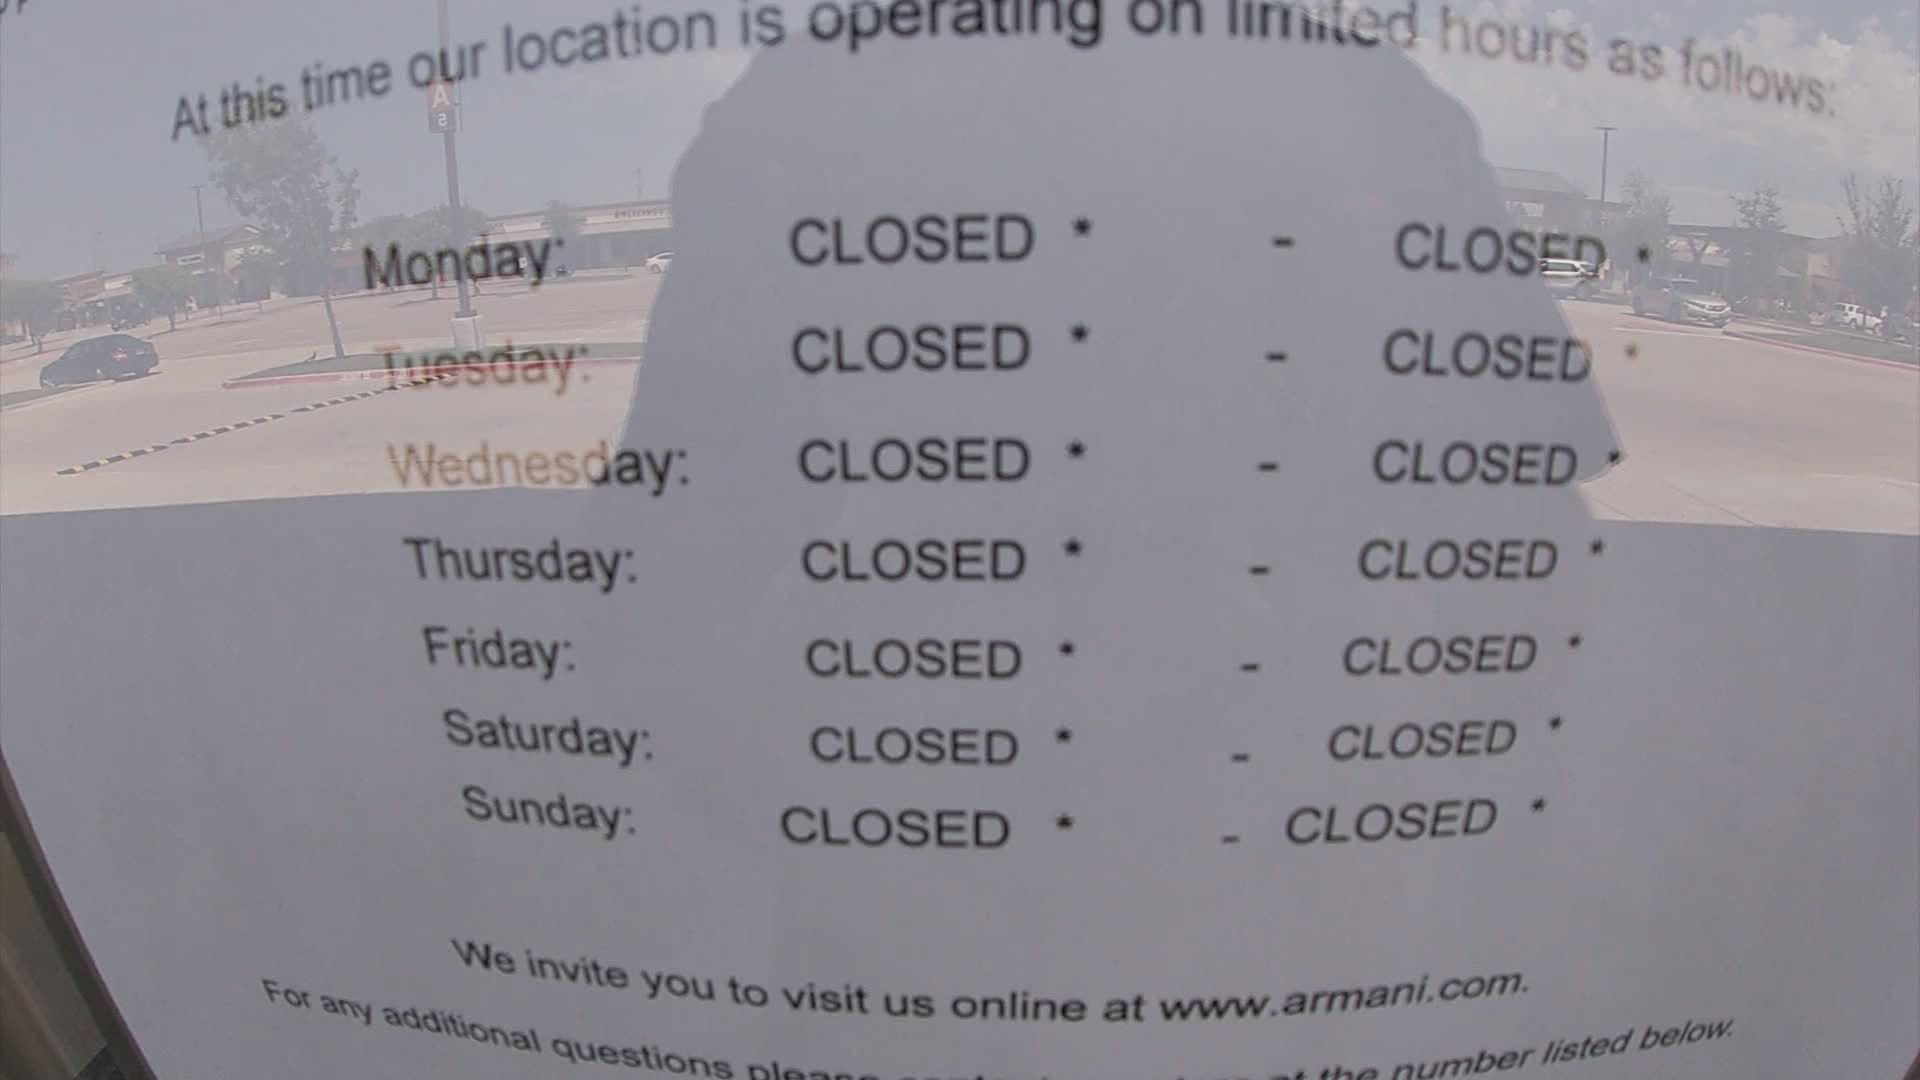 Though malls are allowed to open with 25% occupancy, many stores remain closed.